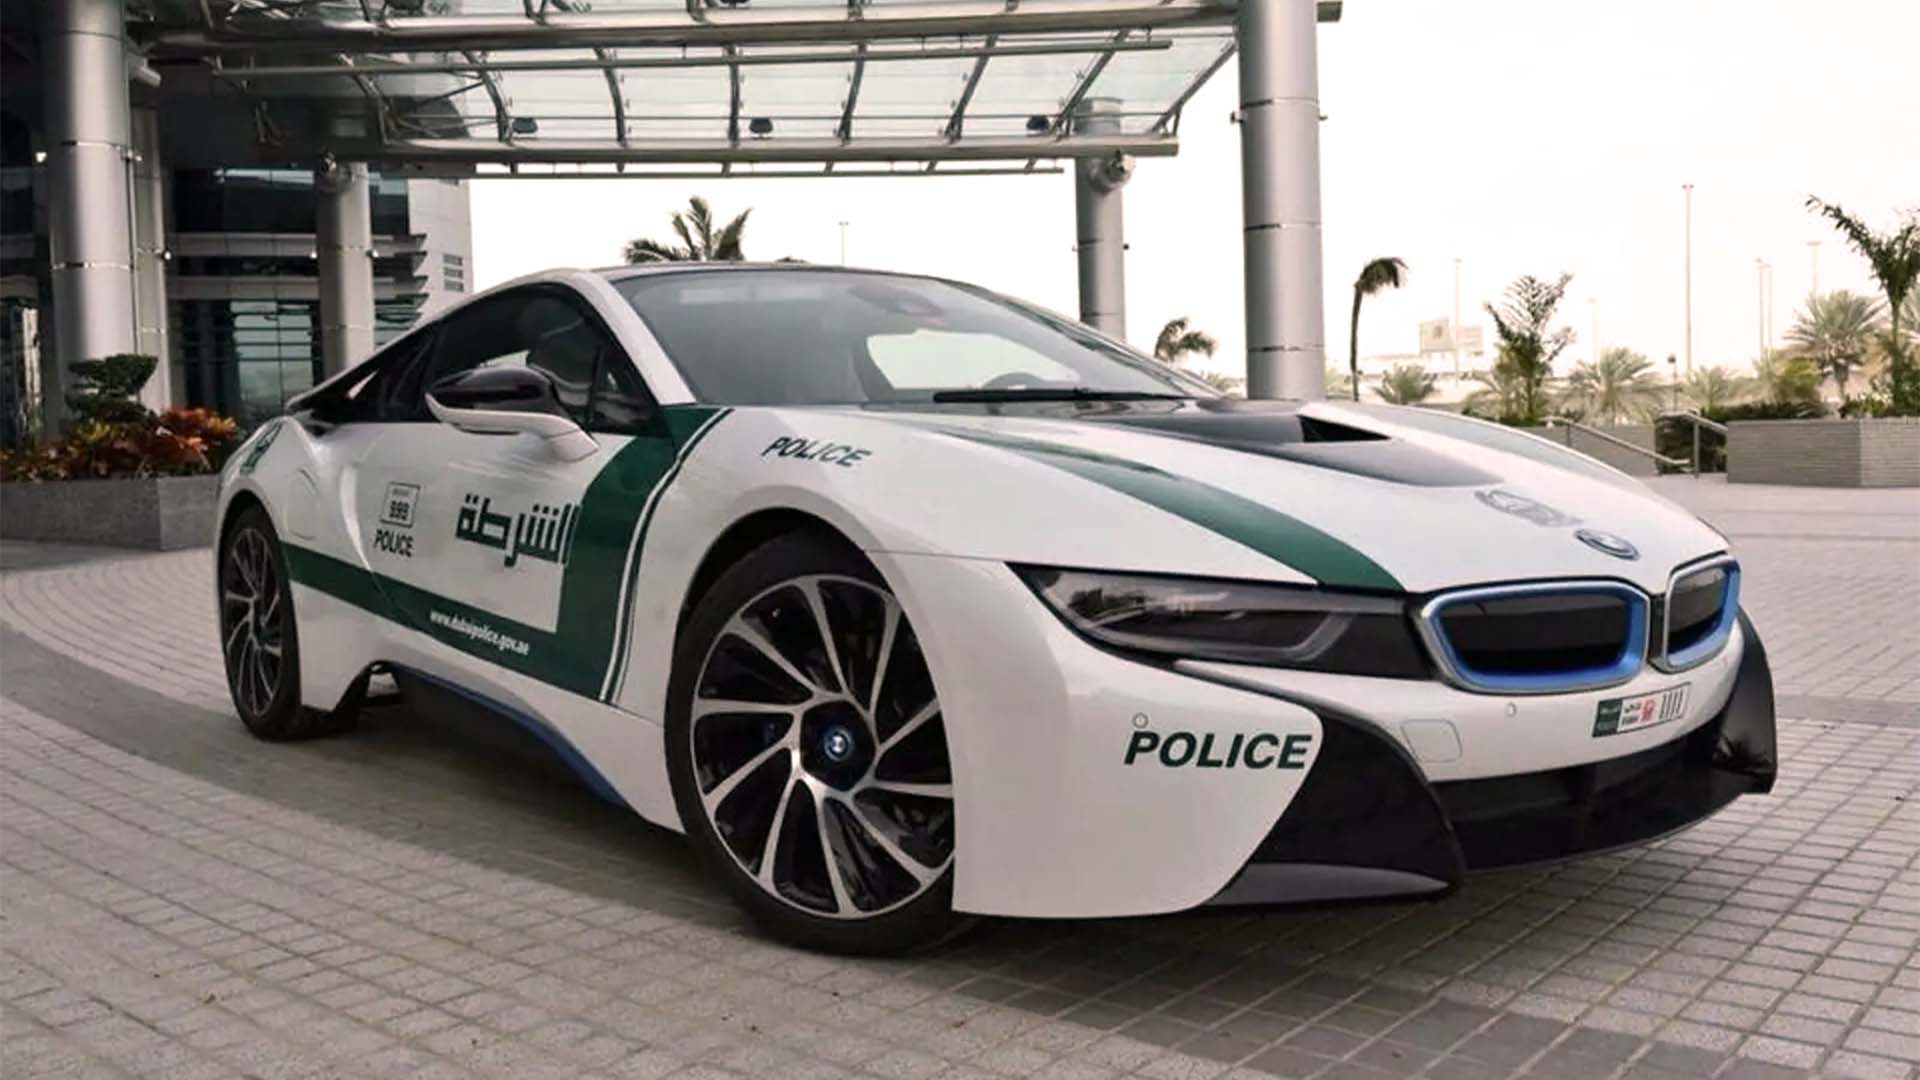 The BMW i8, the first high-performance hybrid adopted by the government of Dubai